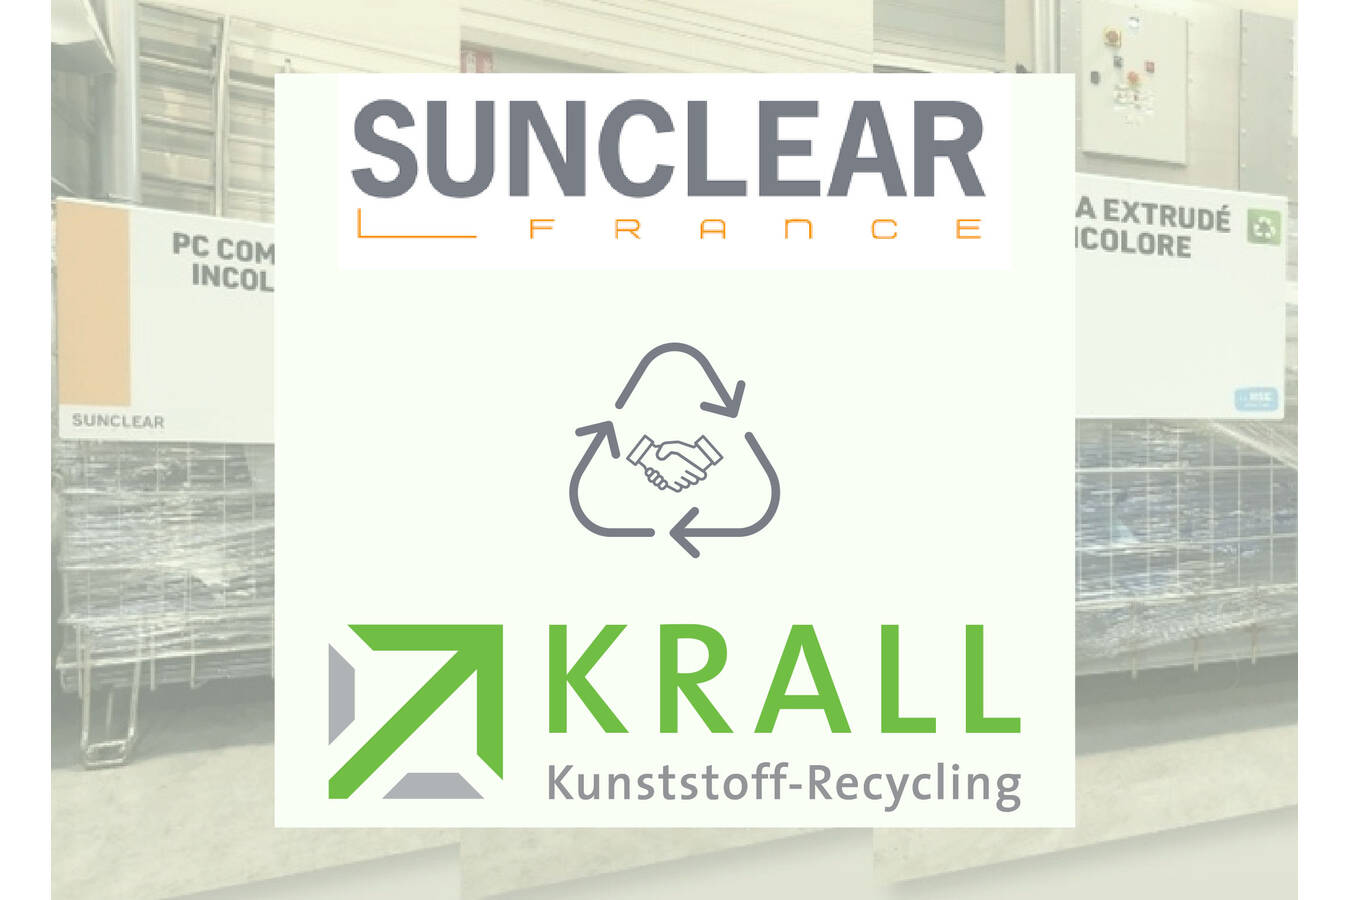 Krall: Disposal Contract with Sunclear France Krall Kunststoff-Recycling has signed a disposal contract with French semi-finished products distributor Sunclear.